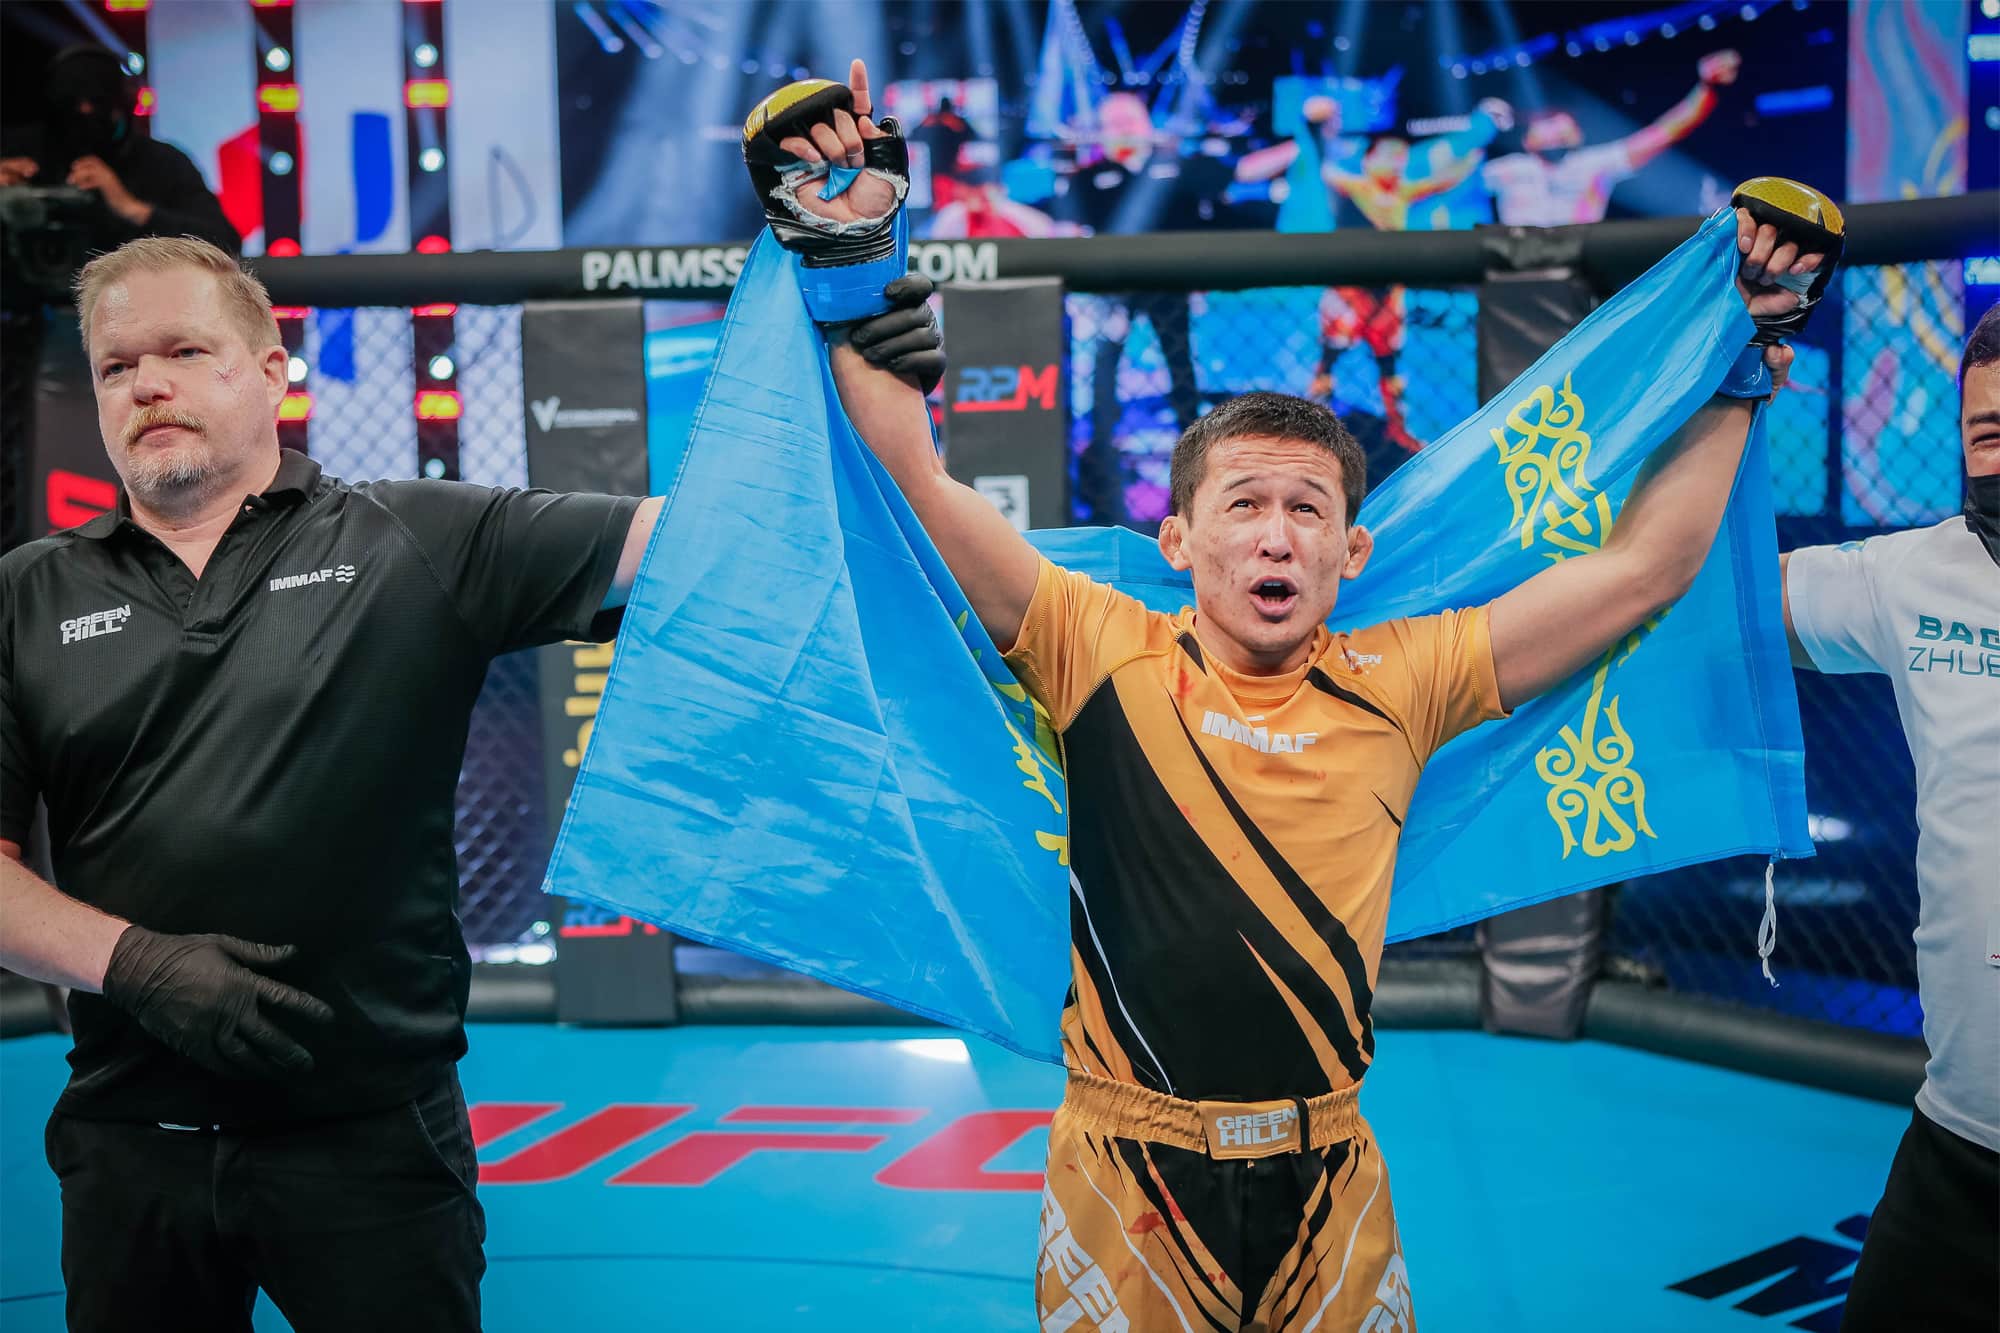 Kazakhstan’s Zhubanysh becomes IMMAF’s first three-time world champion while Kiwi rising star Jenkins stuns rival as Day 6 concludes in Abu Dhabi